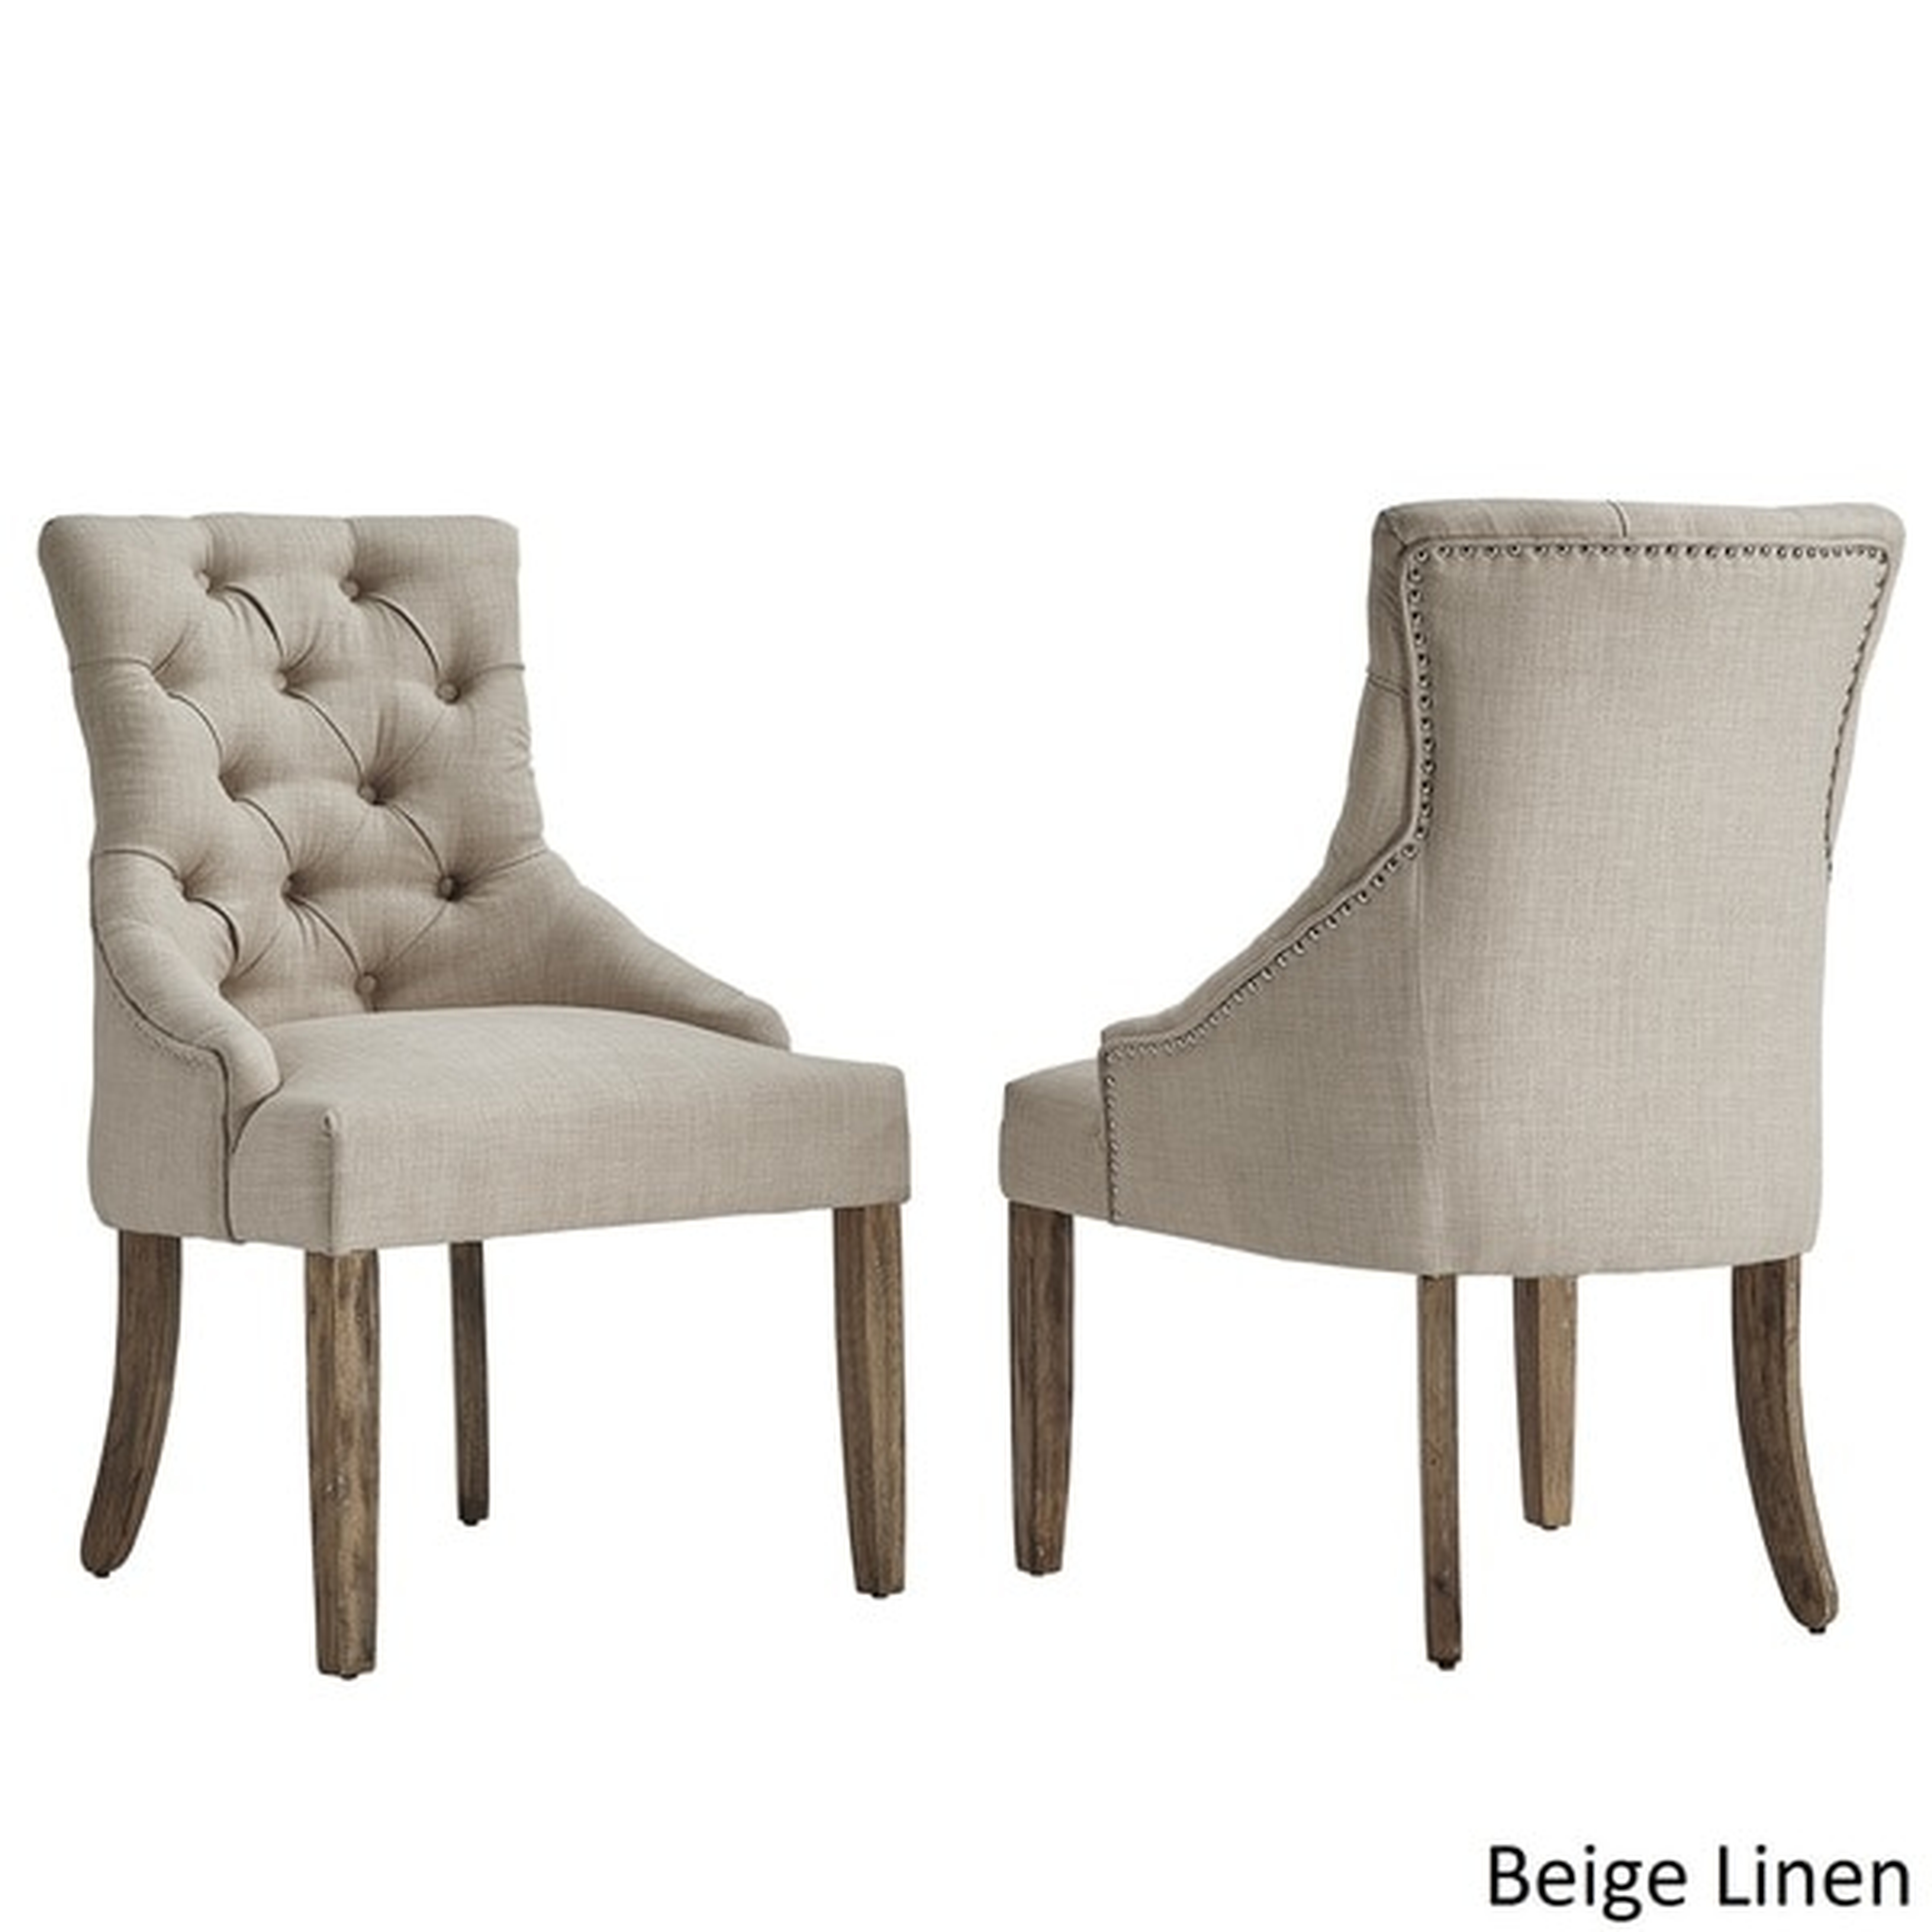 Benchwright Button Tufts Wingback Hostess Chairs by SIGNAL HILLS (Set of 2) - Overstock